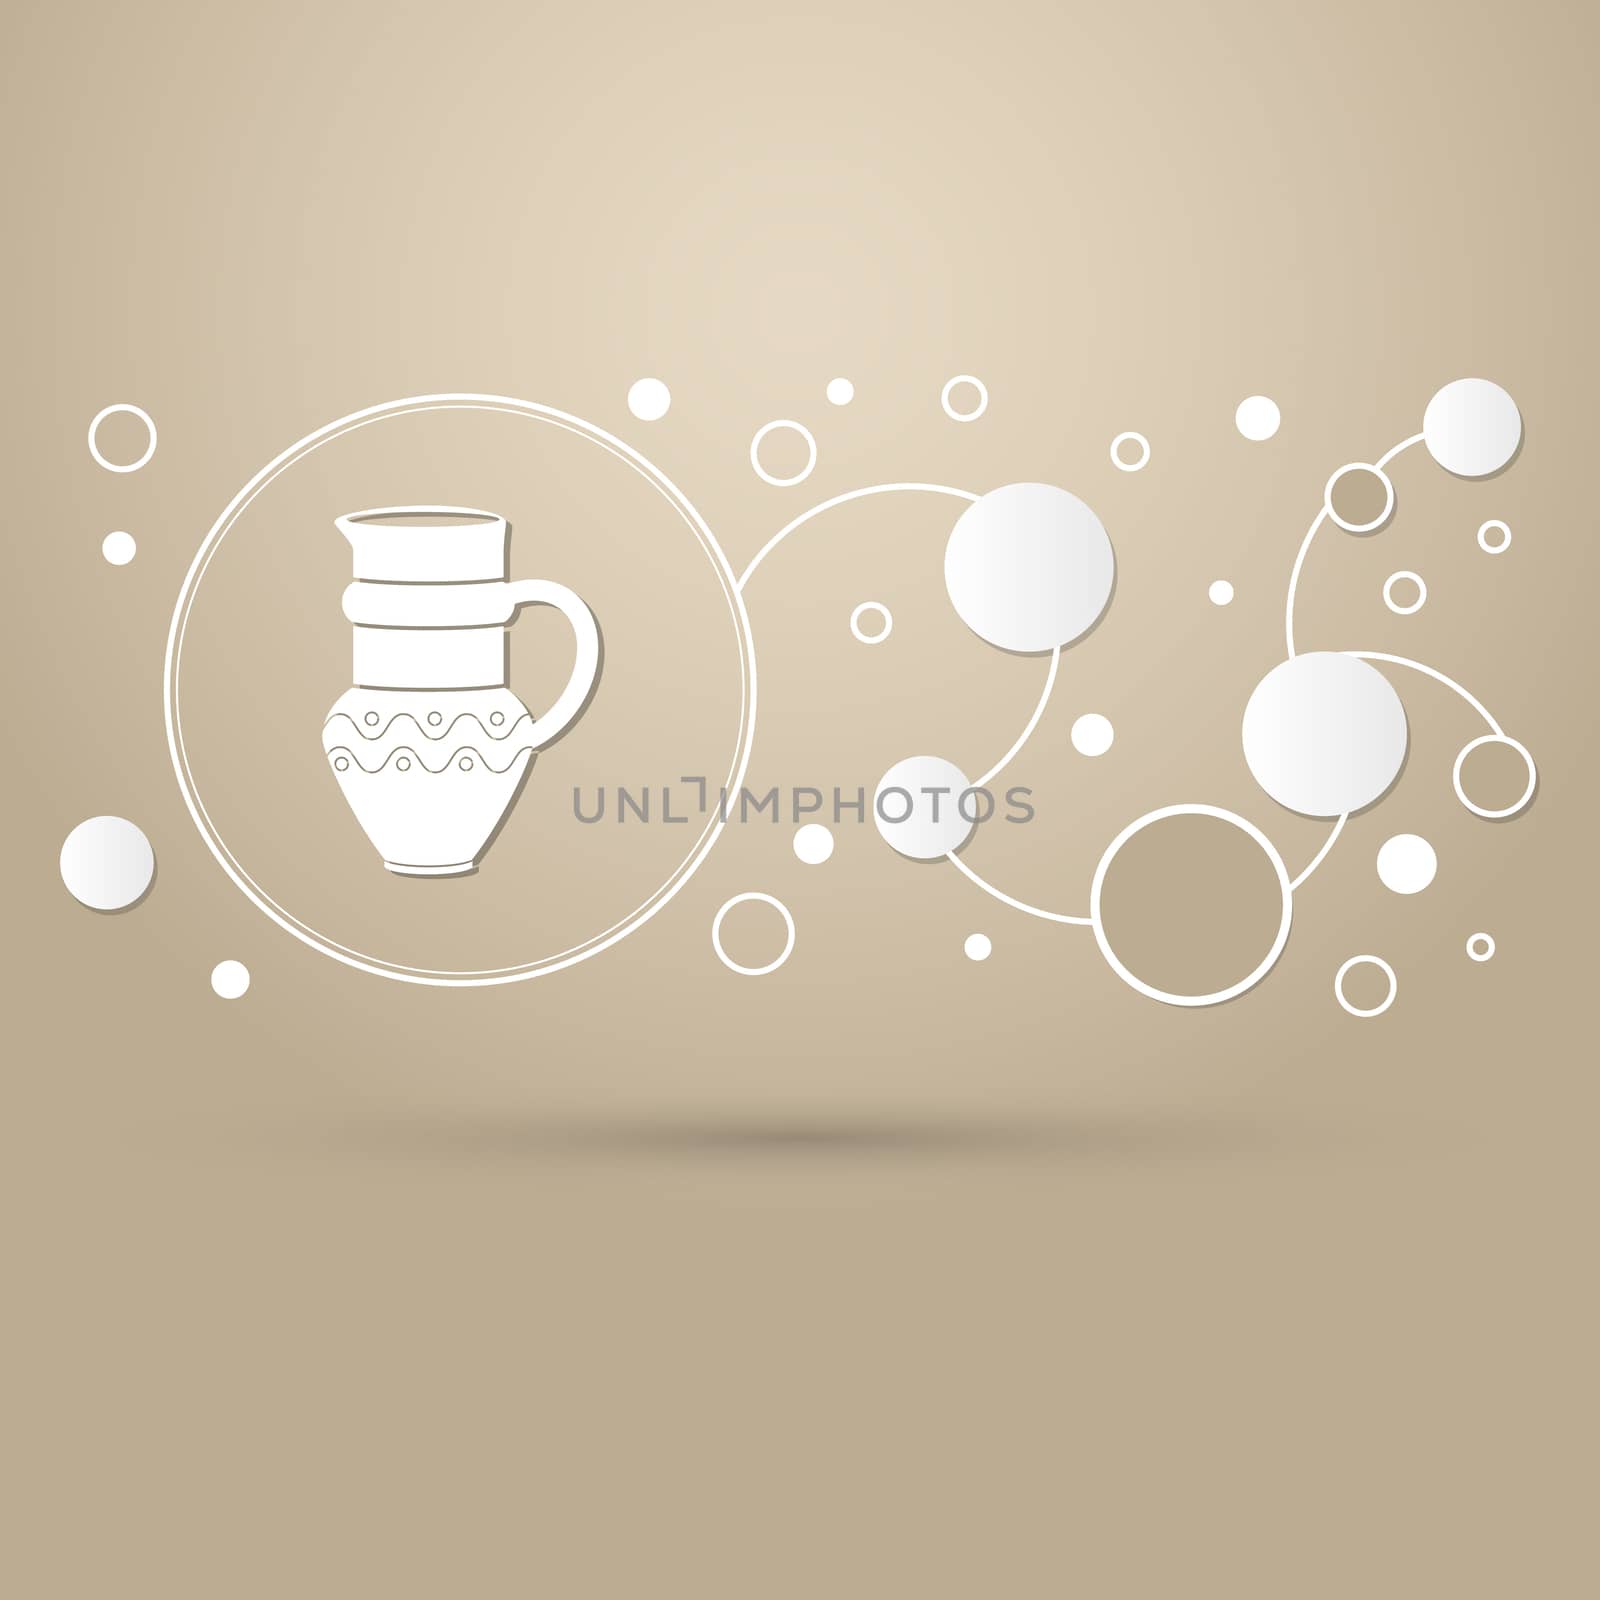 Jug Icon on a brown background with elegant style and modern design infographic.  by Adamchuk